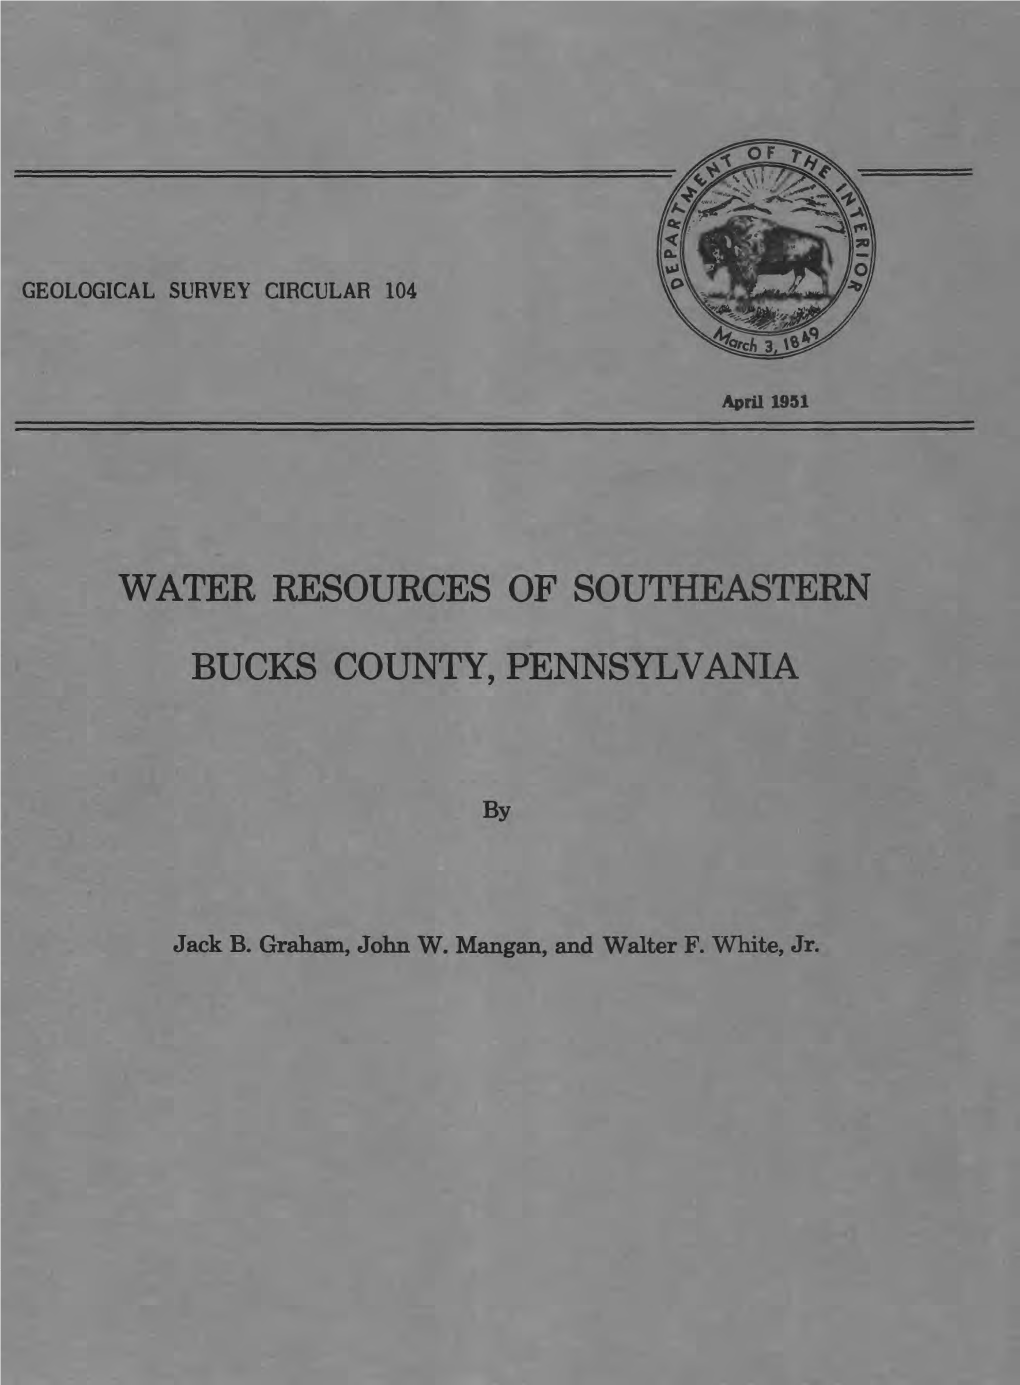 Water Resources of Southeastern Bucks County, Pennsylvania